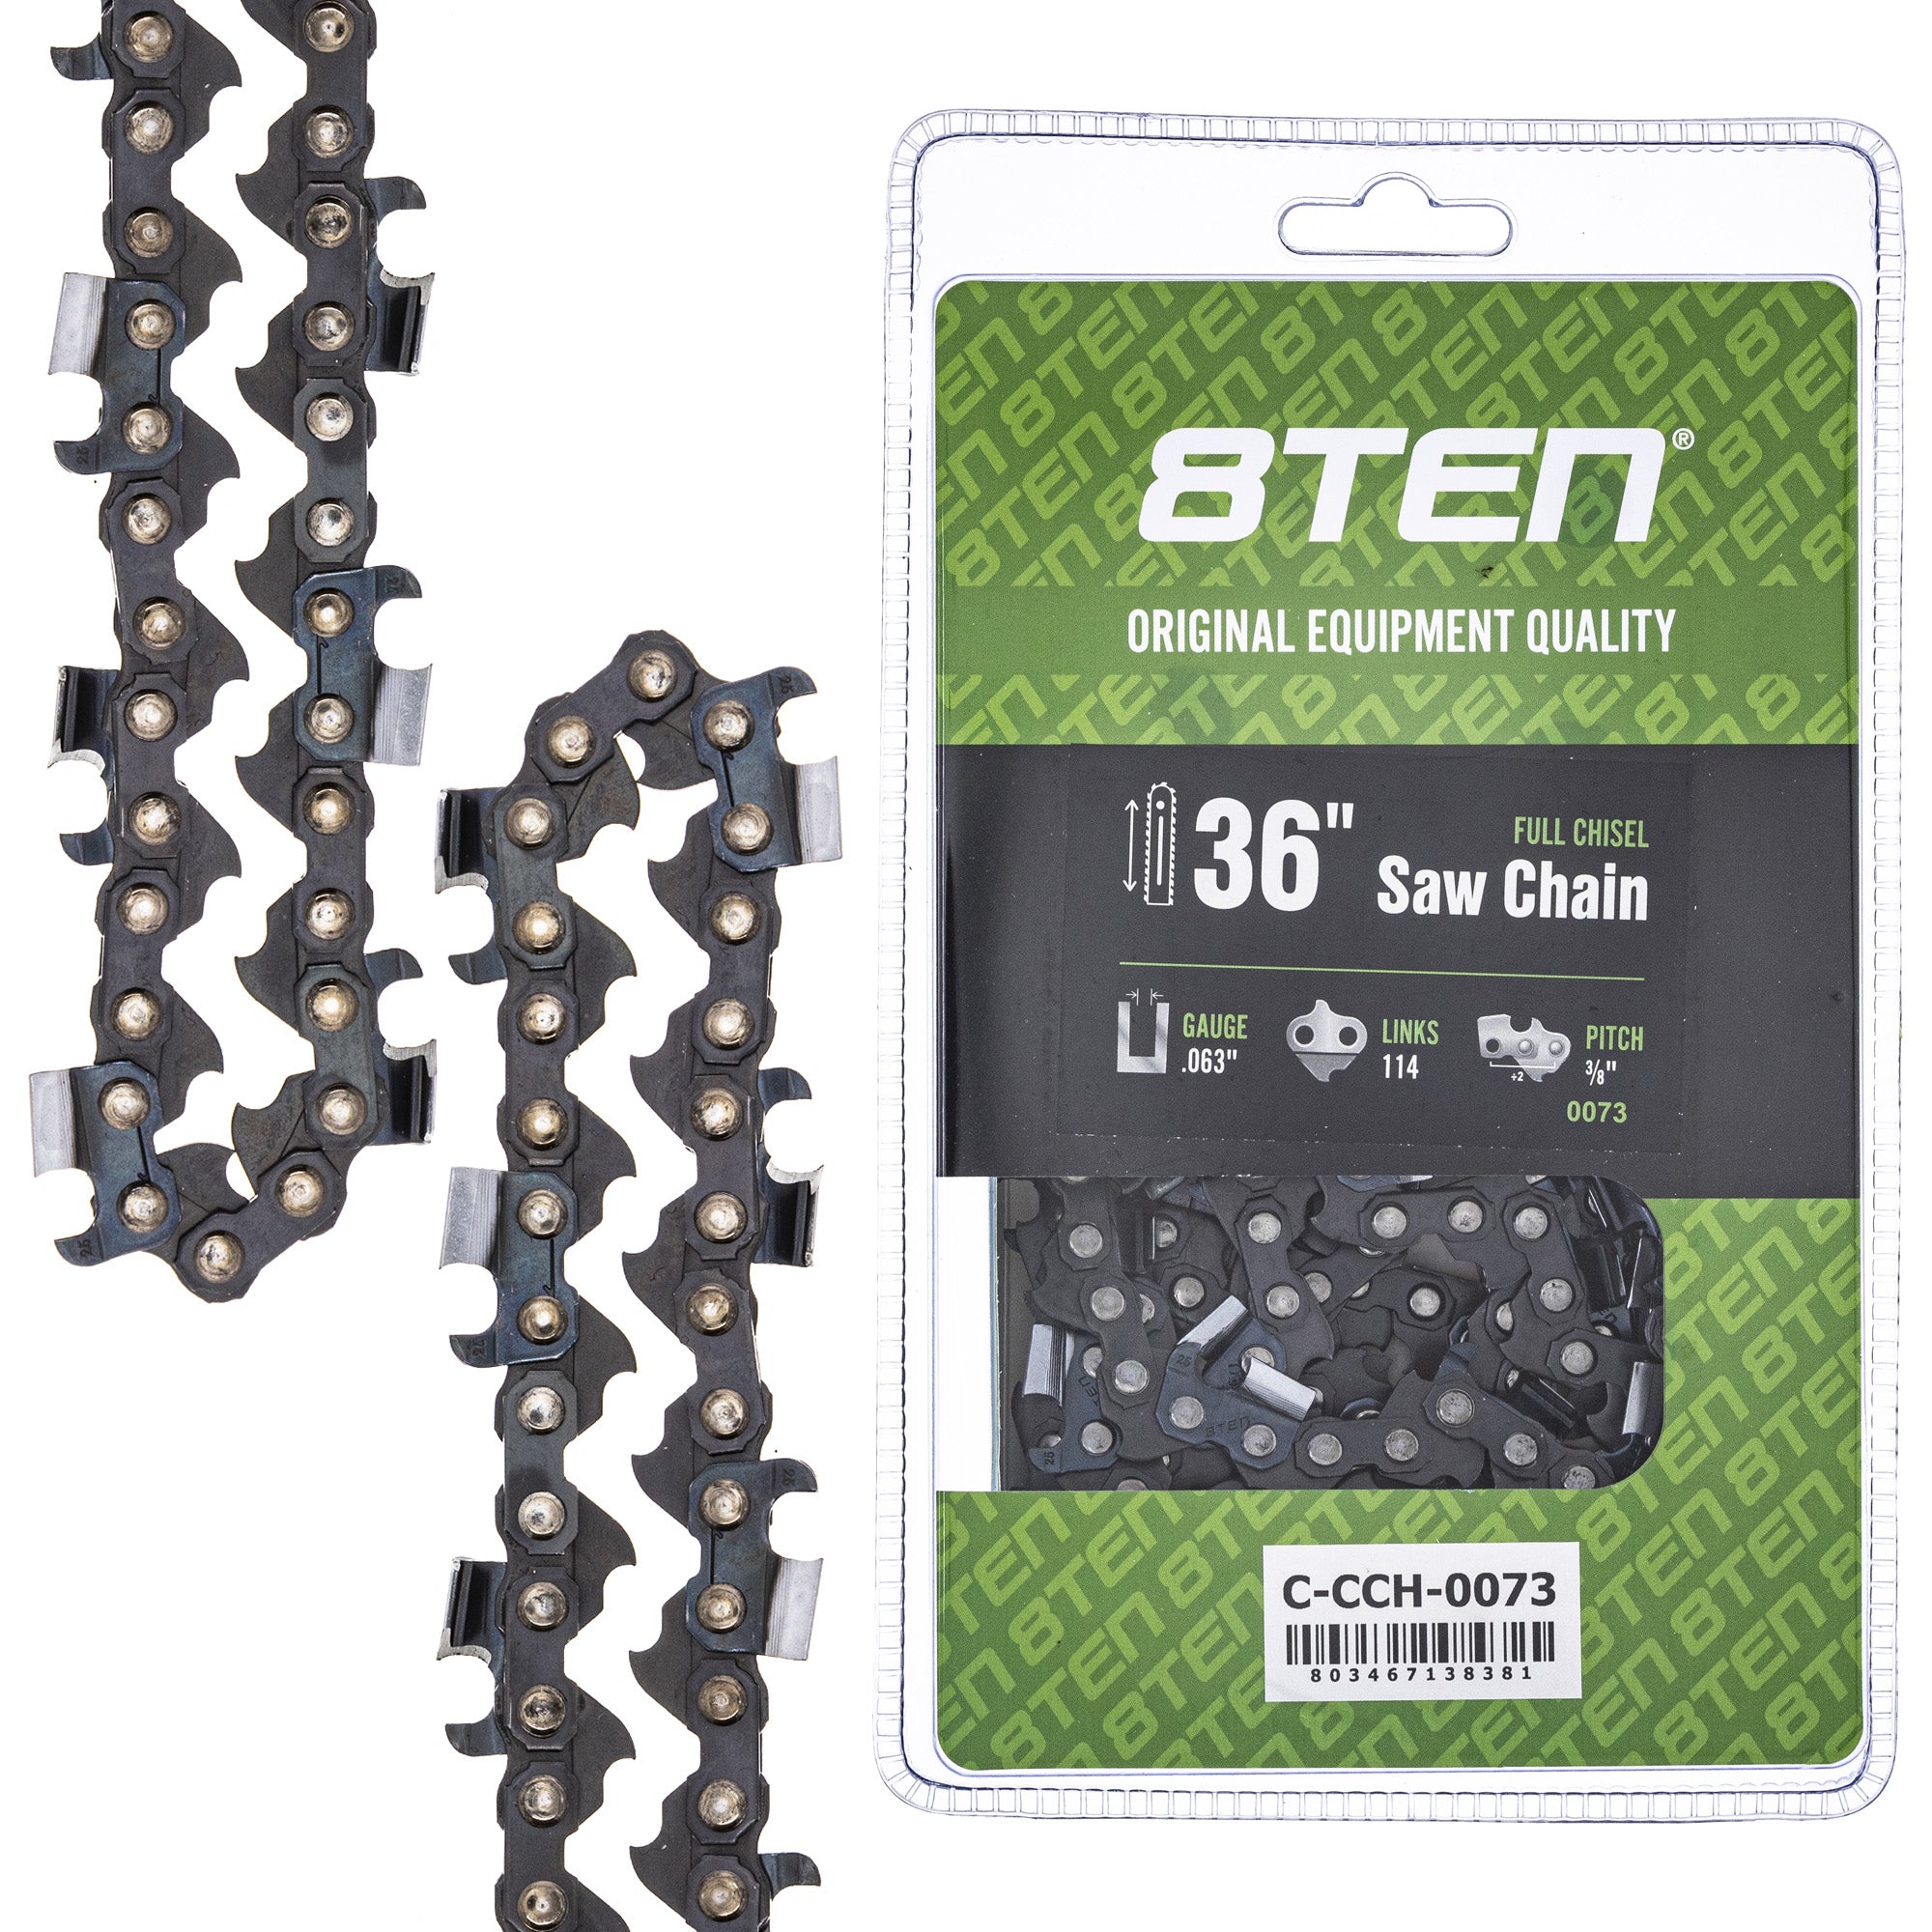 8TEN MK1010379 Guide Bar & Chain for MSE MS E 634